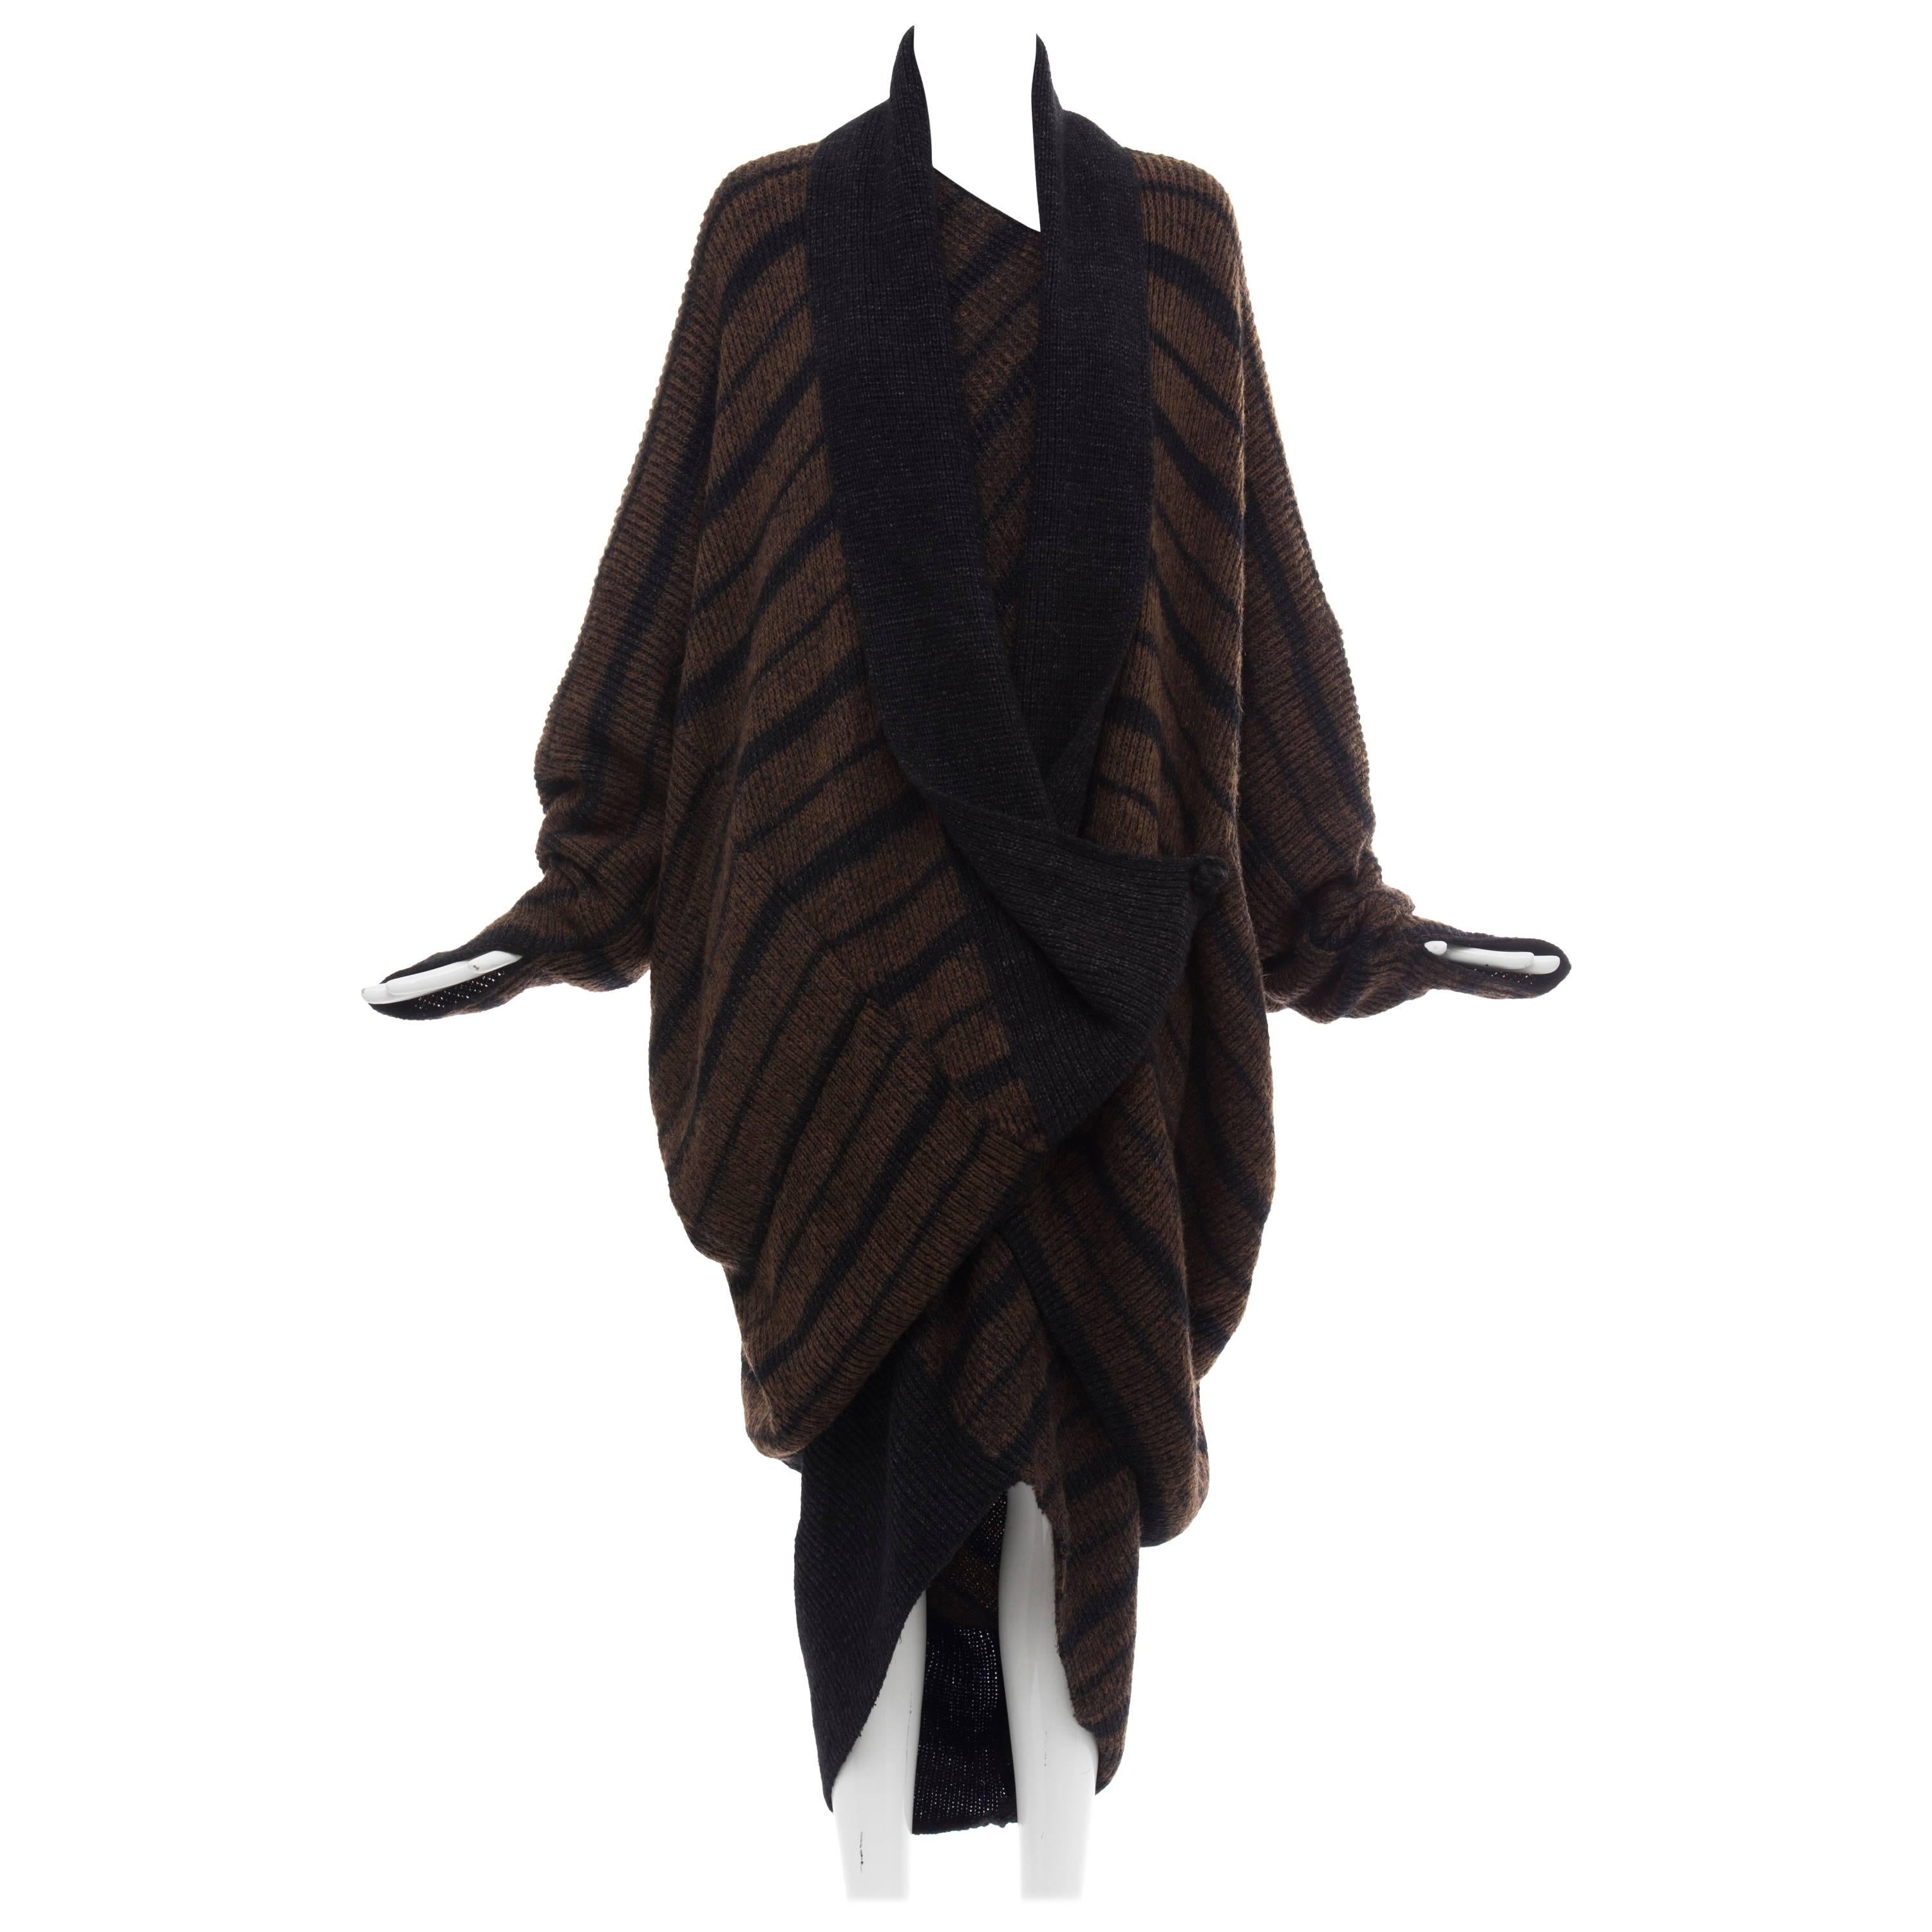 Issey Miyake Striped Wool Sweater Dress Cocoon Cardigan Ensemble, Circa 1970s For Sale